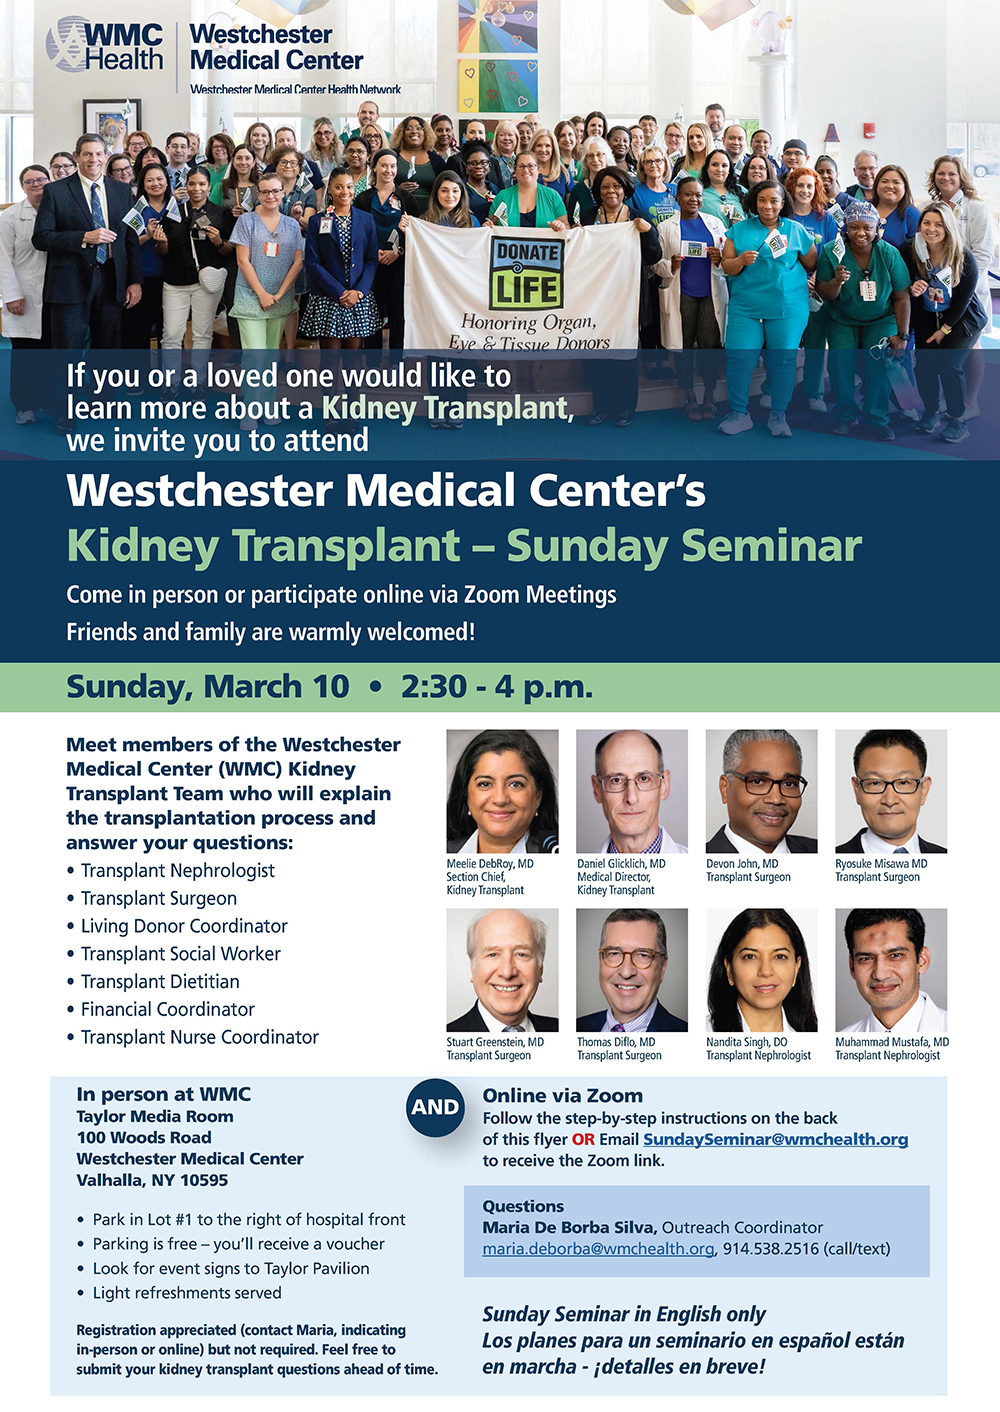 Meet members of the Westchester Medical Center (WMC) Kidney Transplant Team who will explain the transplantation process and answer your questions